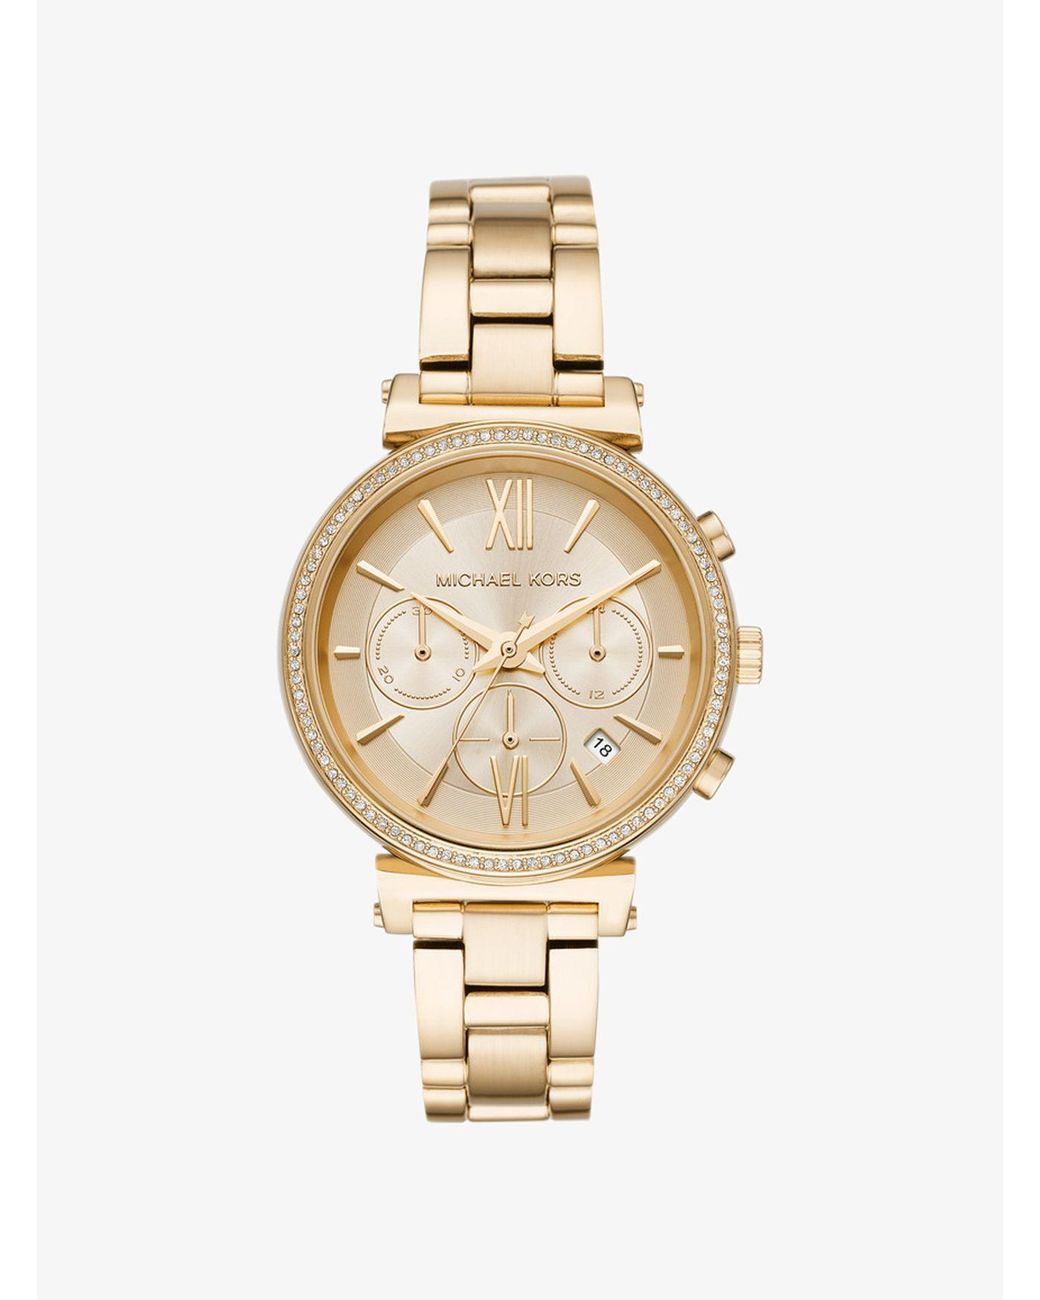 lord and taylor michael kors watches